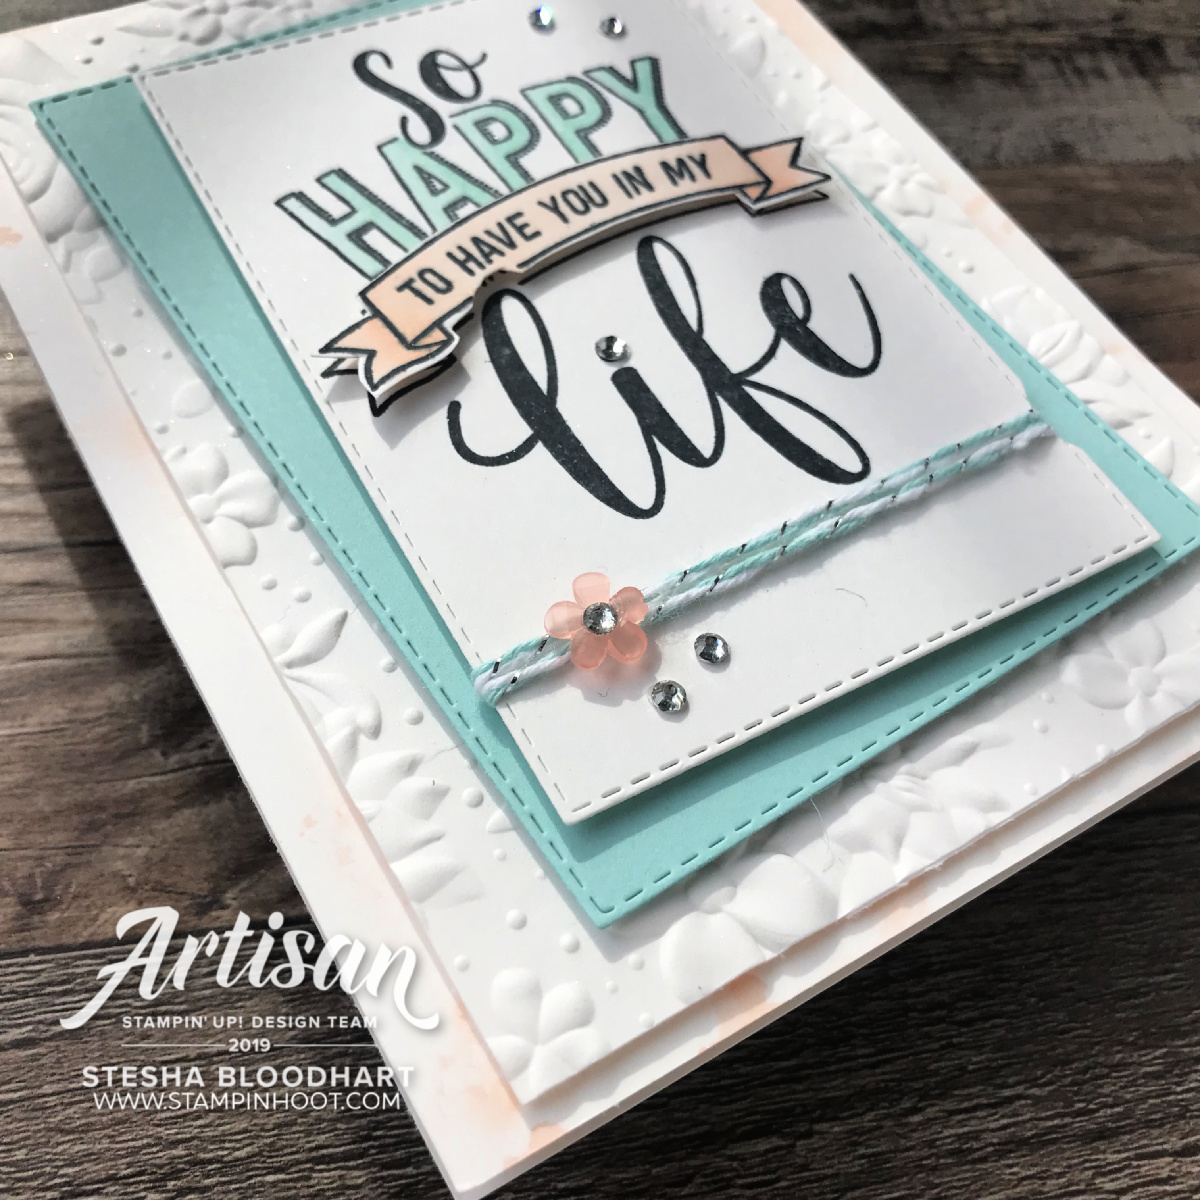 Amazing Life Bundle by Stampin' Up! Rectangle Stitched Framelits Dies Stesha Bloodhart, Stampin' Up!